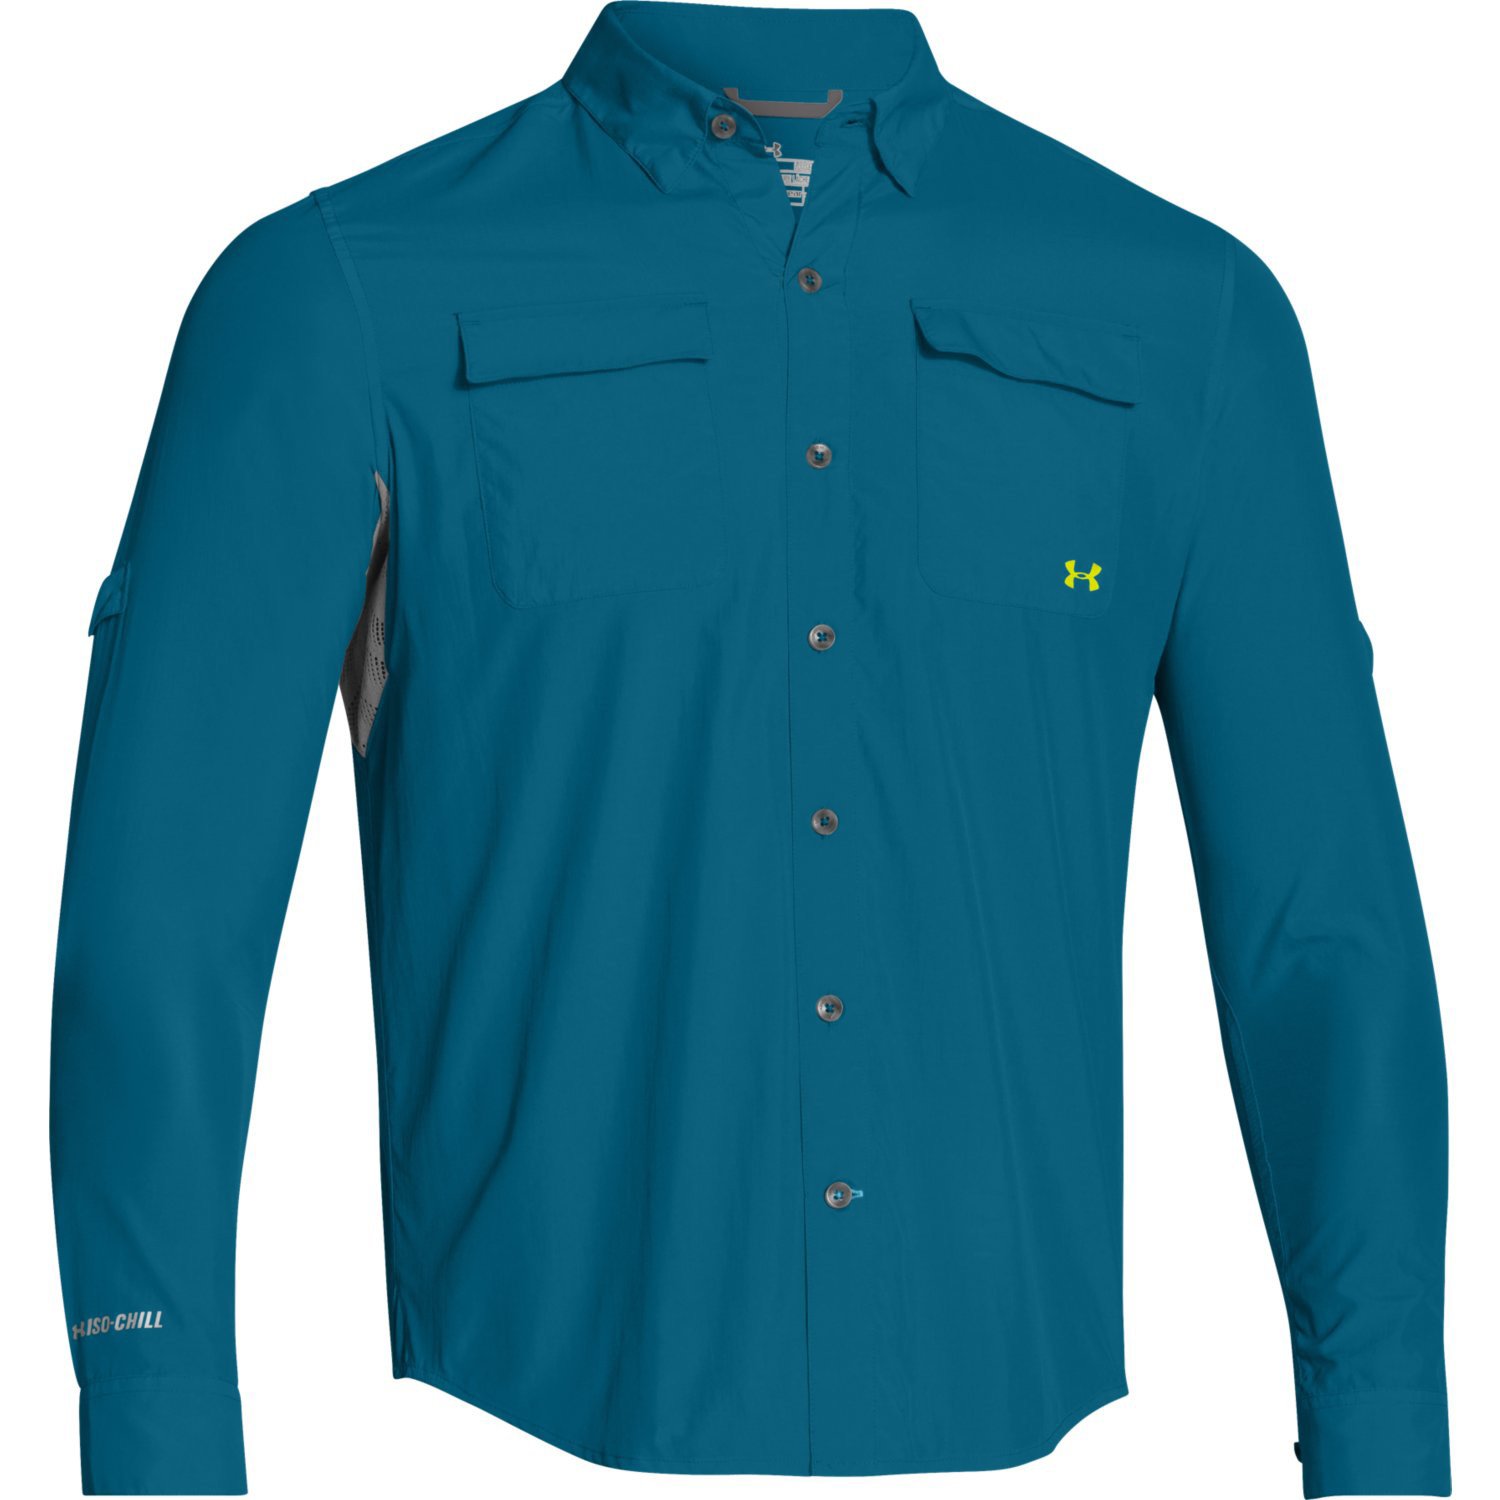 under armour men's fishing shirts Hot Sale - OFF 52%